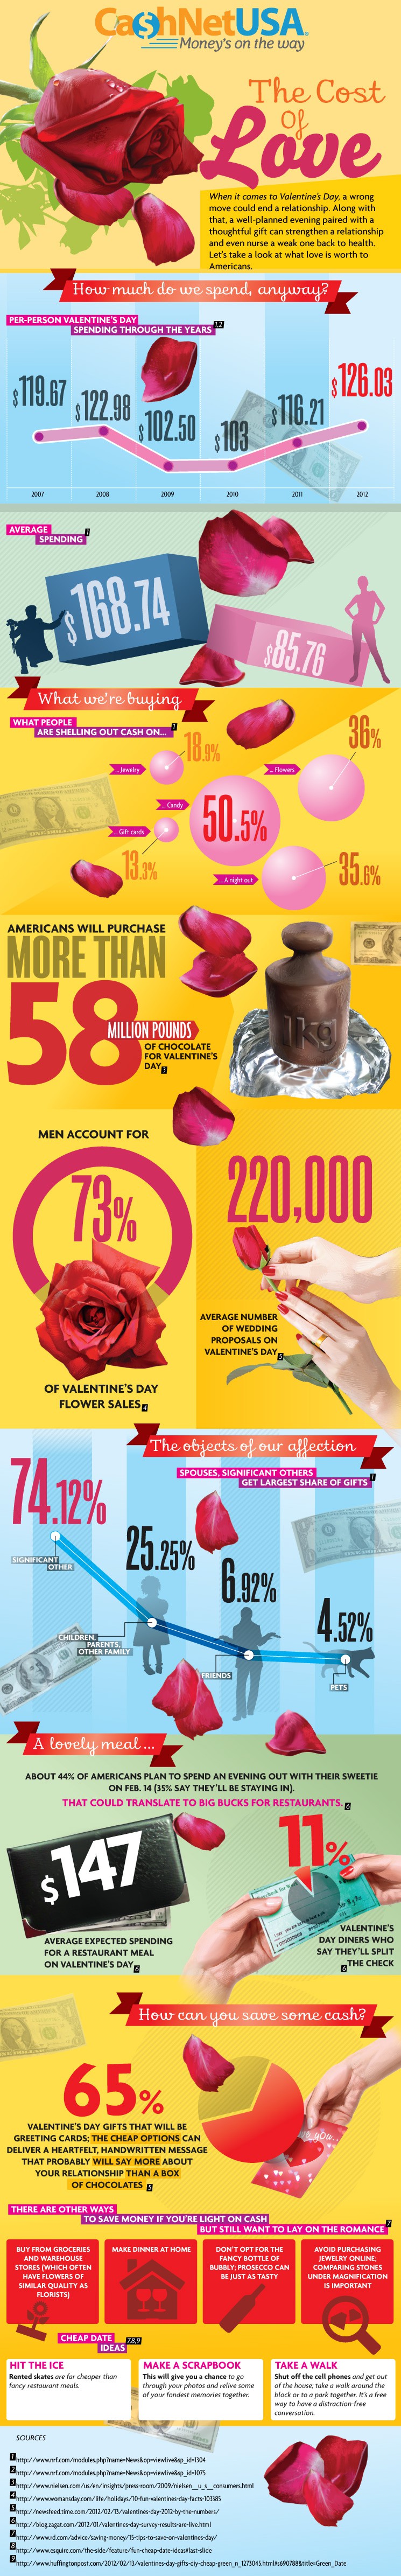 The cost of love infographic